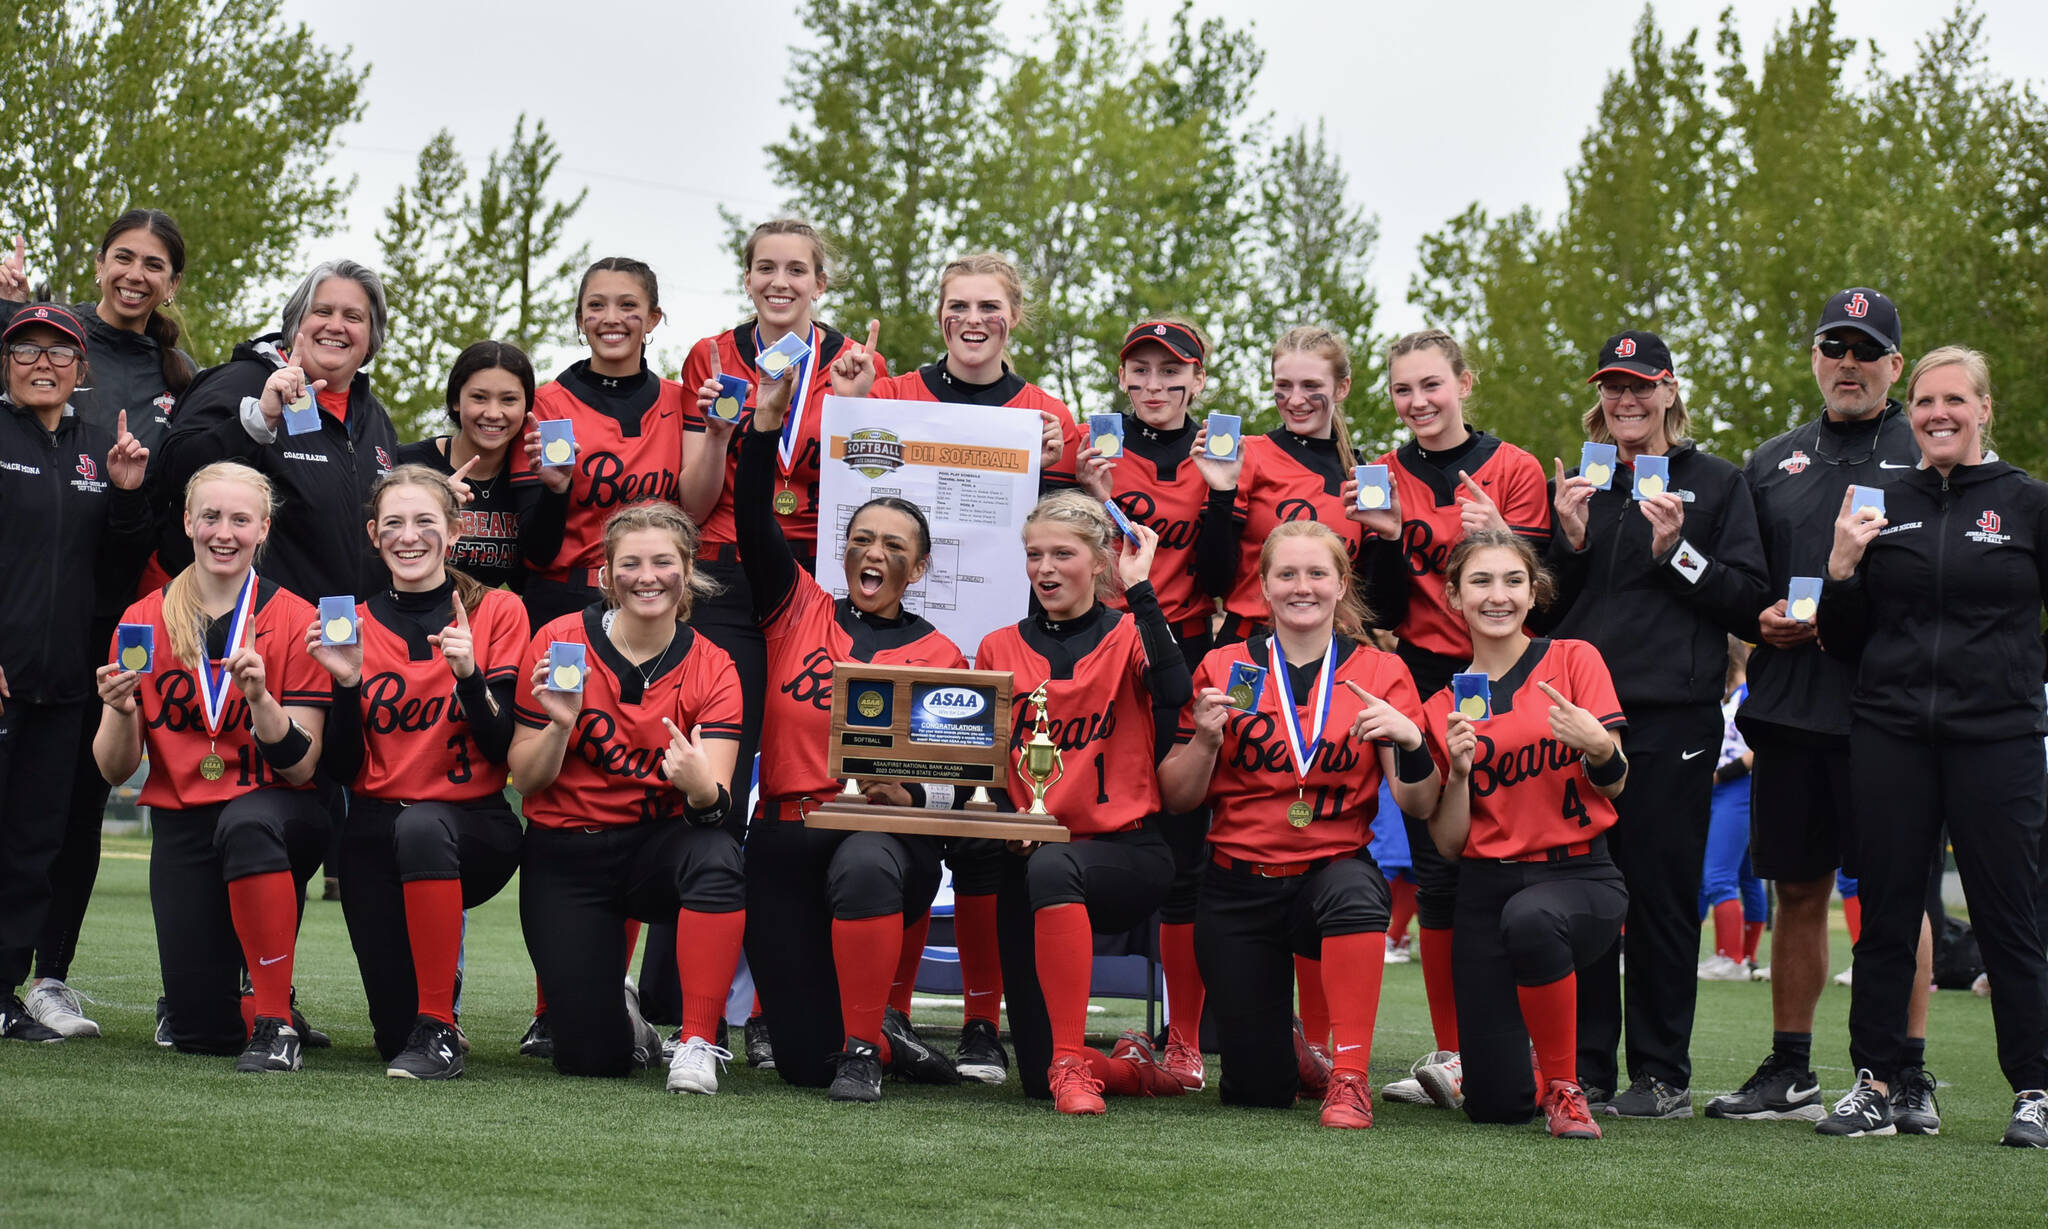 The JDHS Crimson Bears pose with their championship trophy after defeating the Sitka Wolves 6-5 on Saturday for the ASAA Division II State Softball Championship at Anchorage’s Cartee Fields. (Courtesy Photo /JDHS Softball)